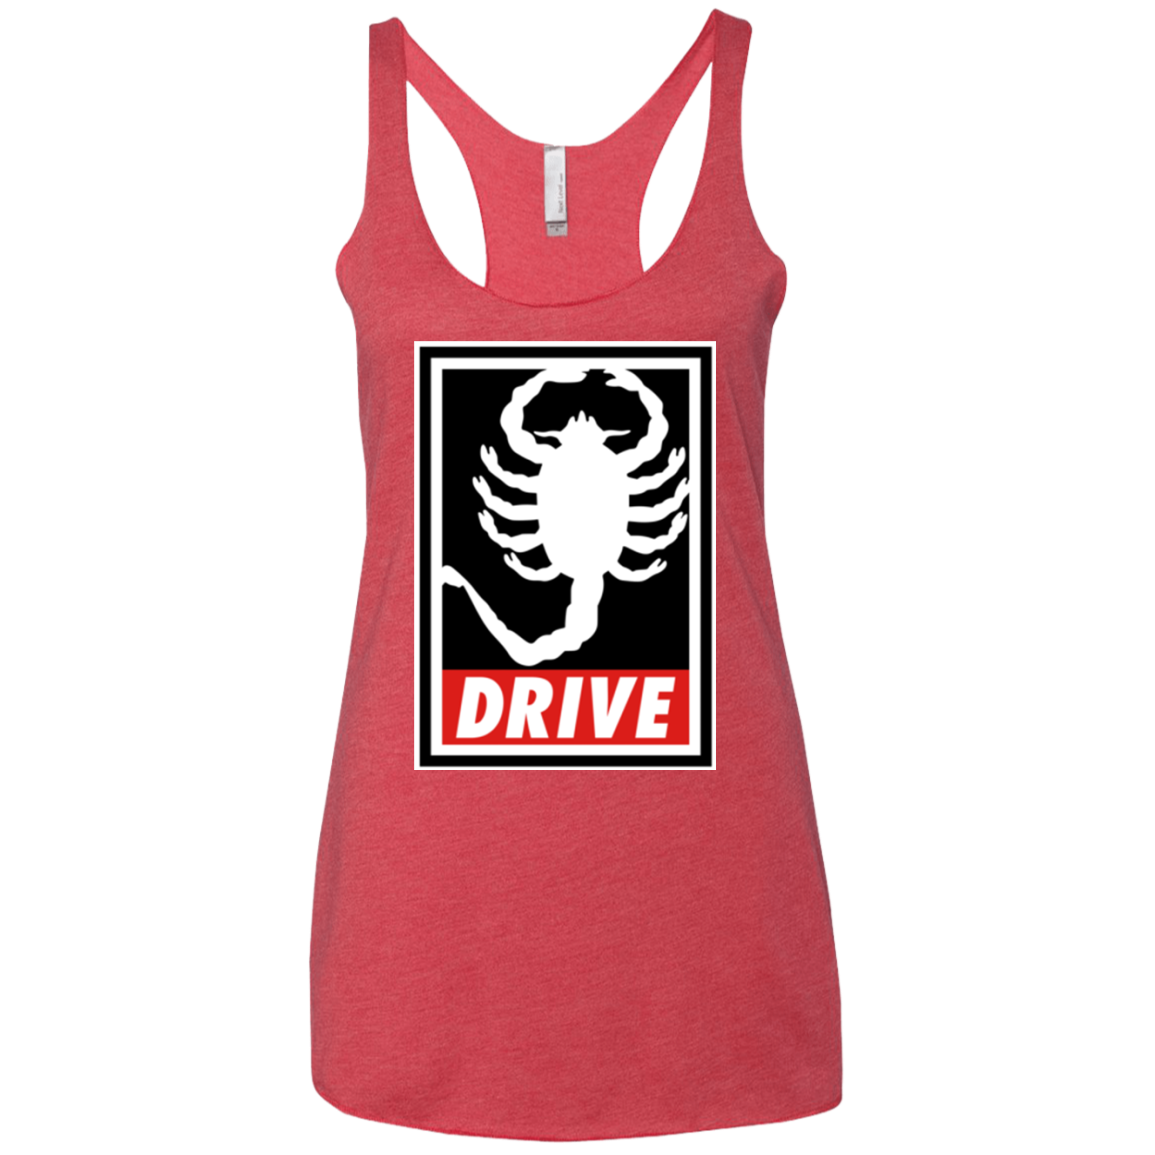 Obey and drive Women's Triblend Racerback Tank